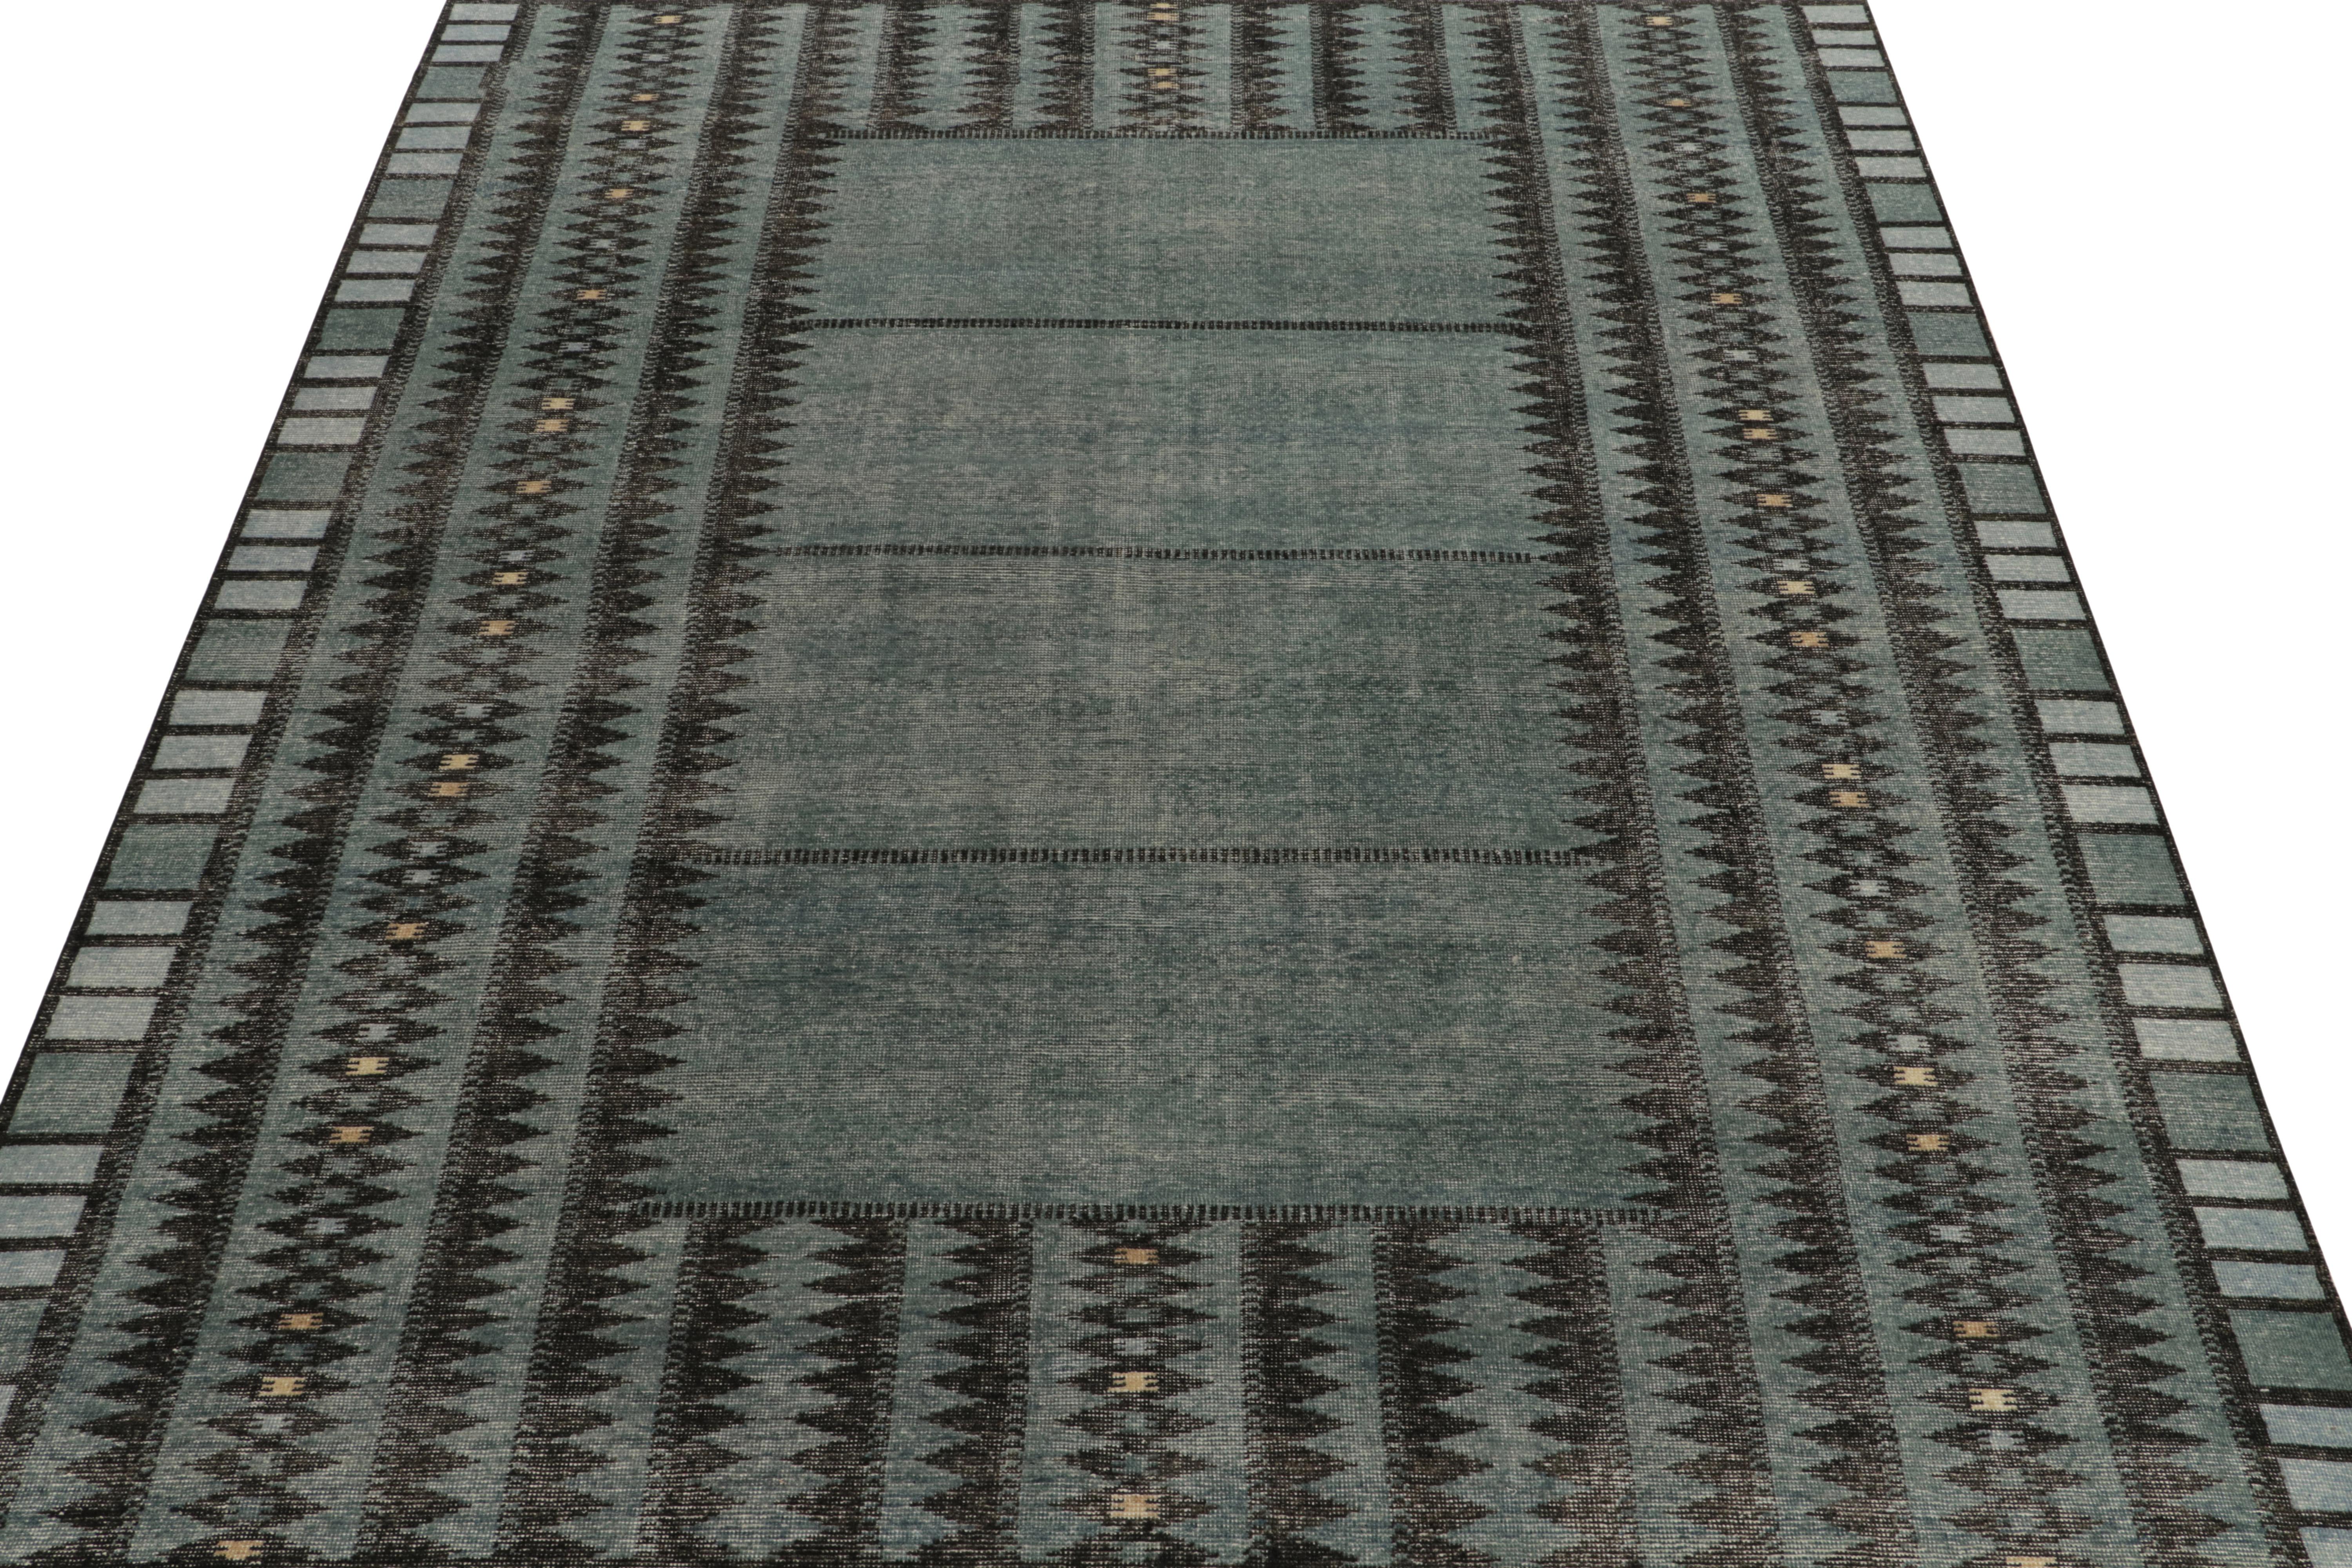 From Rug & Kilim’s Homage collection, a 9x12 handknotted rug donning a modern deco vibe. The vivacious scale witnesses stripes & geometric repetition in aegean blue, charcoal black juxtaposed by creamy beige & grey accents while exemplifying fine